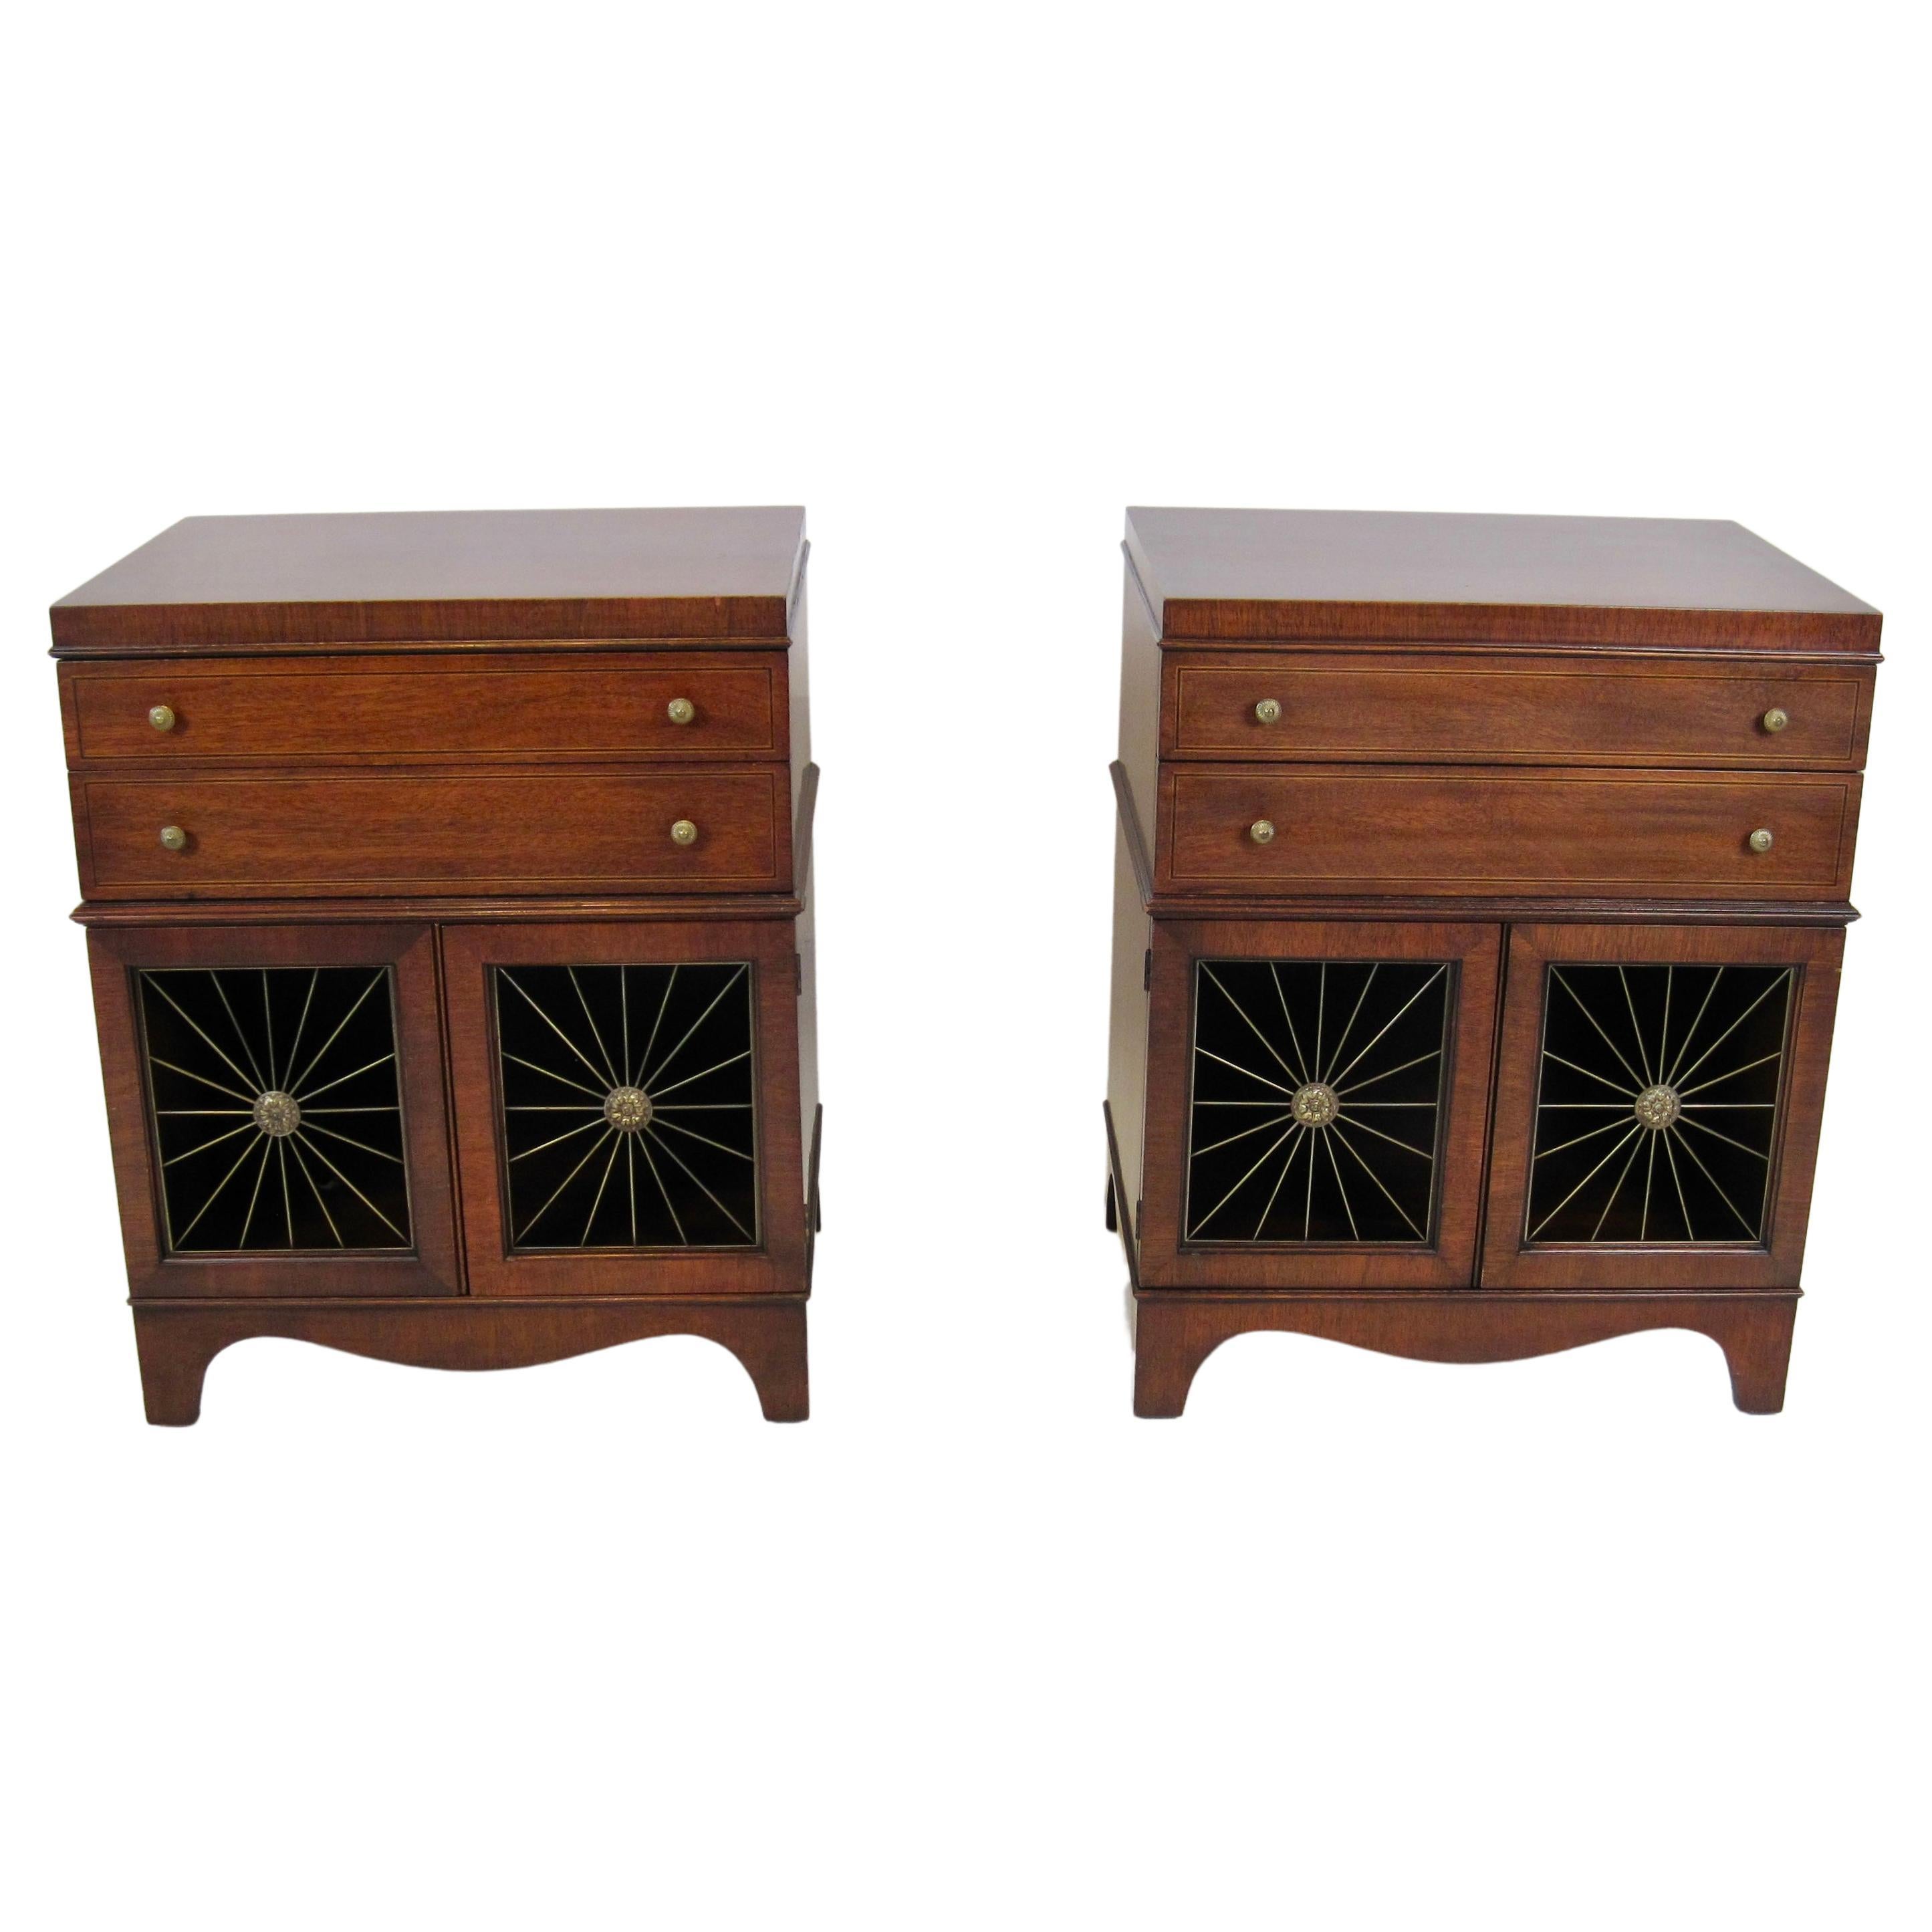 Pair of Johnson Furniture Mahogany Neoclassical End Tables or Nightstands 